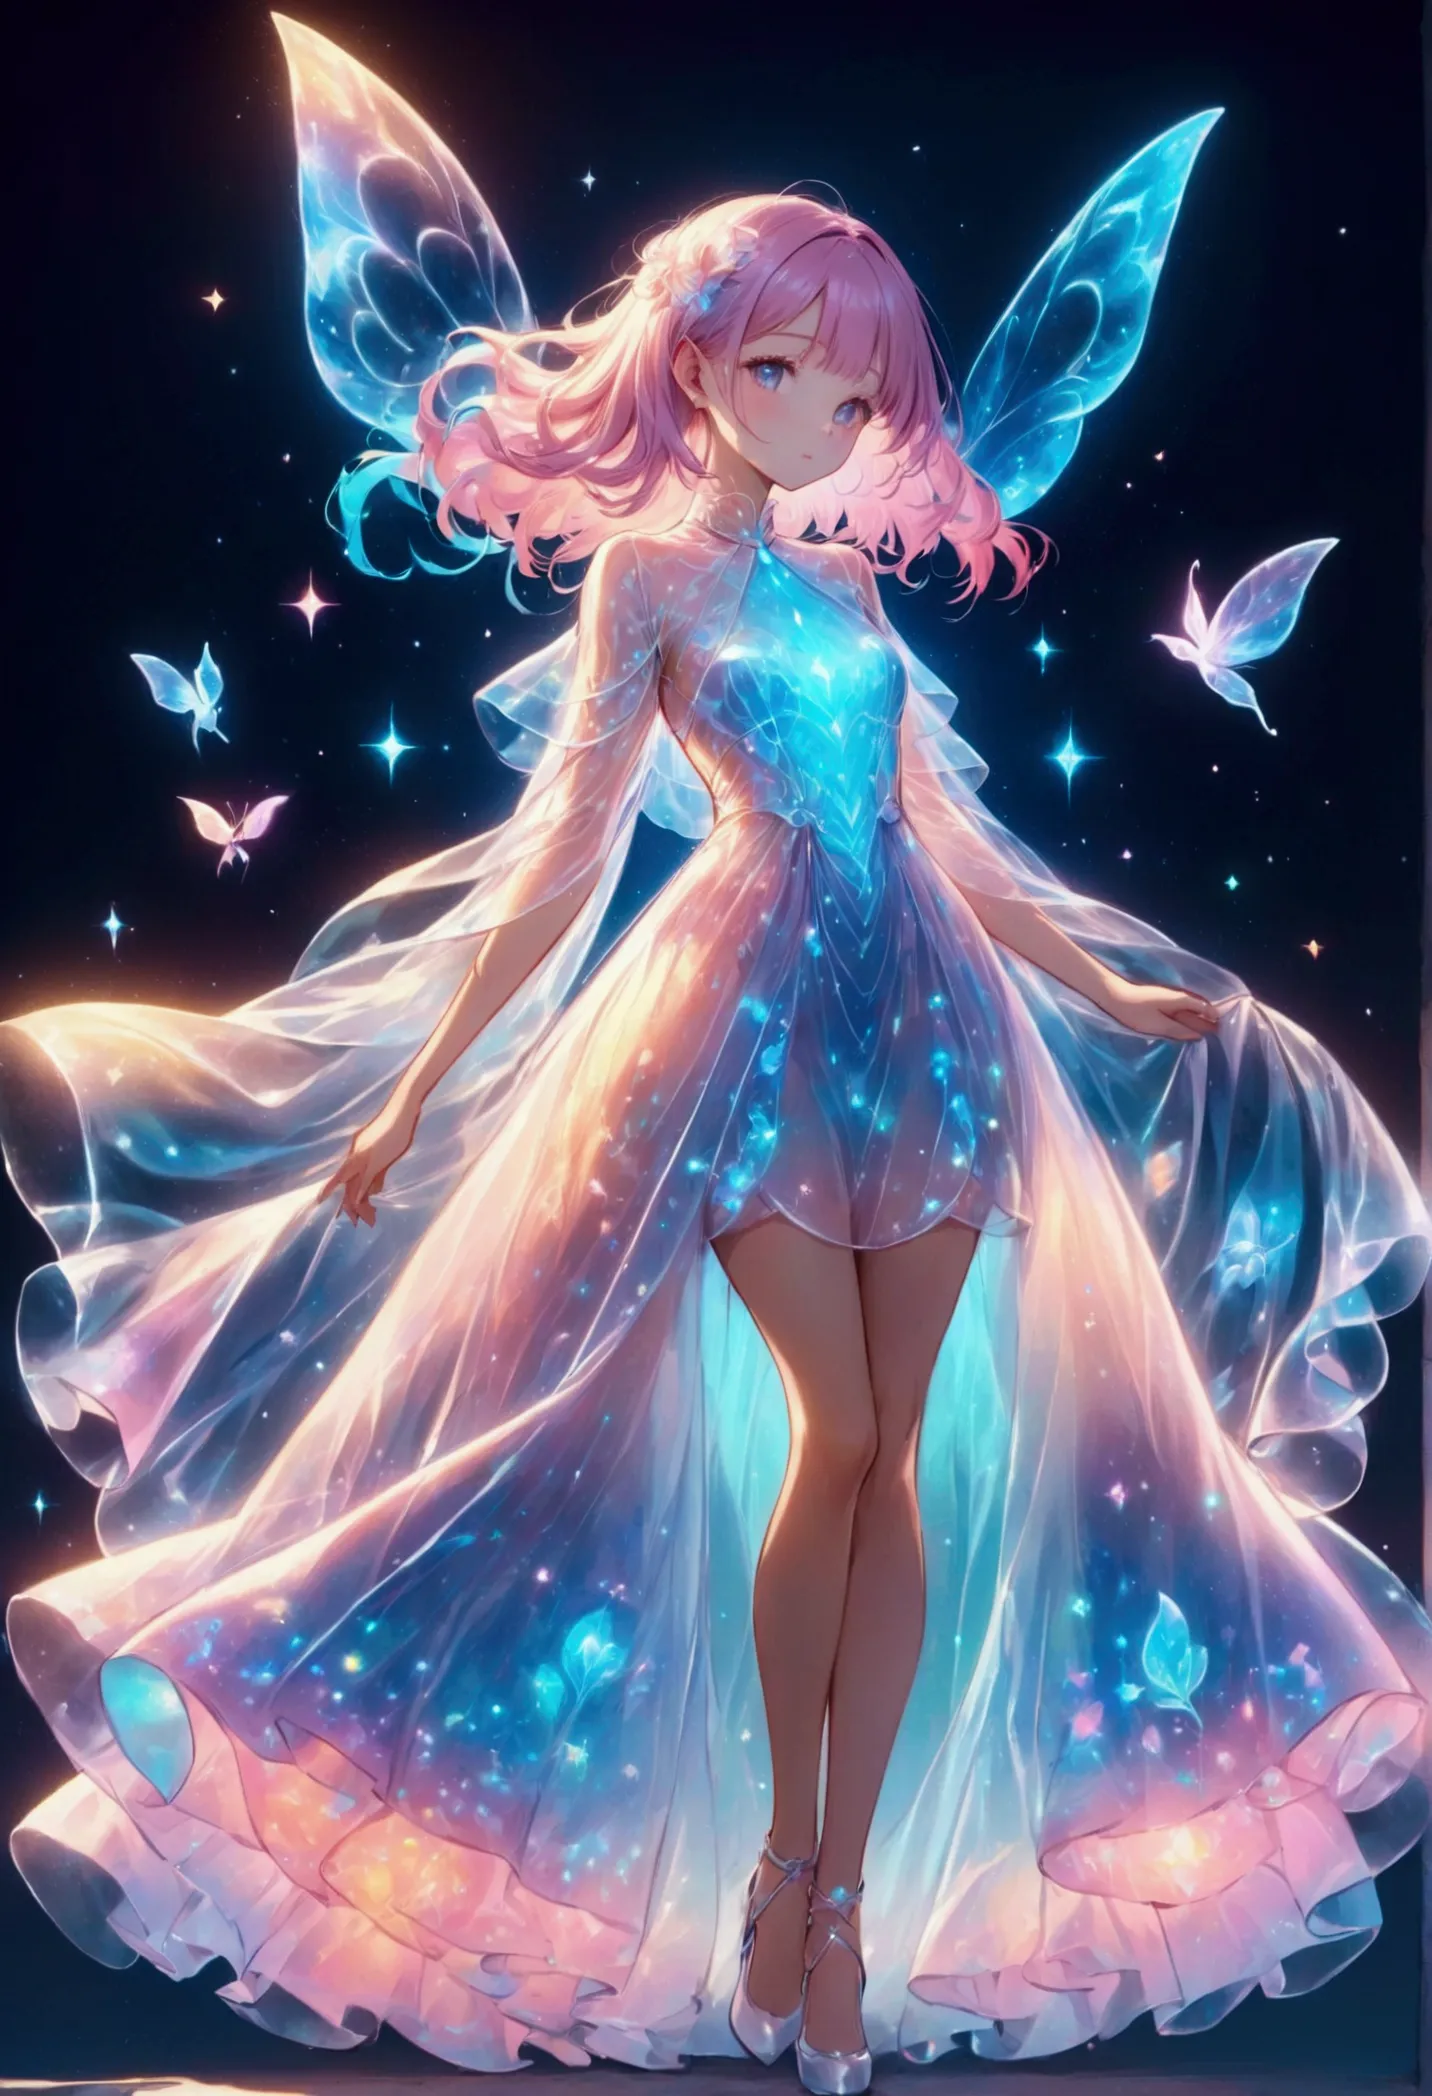 Pastel colored girl,Draw the outline in white,Gentle colors,Translucent vinyl dress,bioluminescent dress,Fantasy,dream